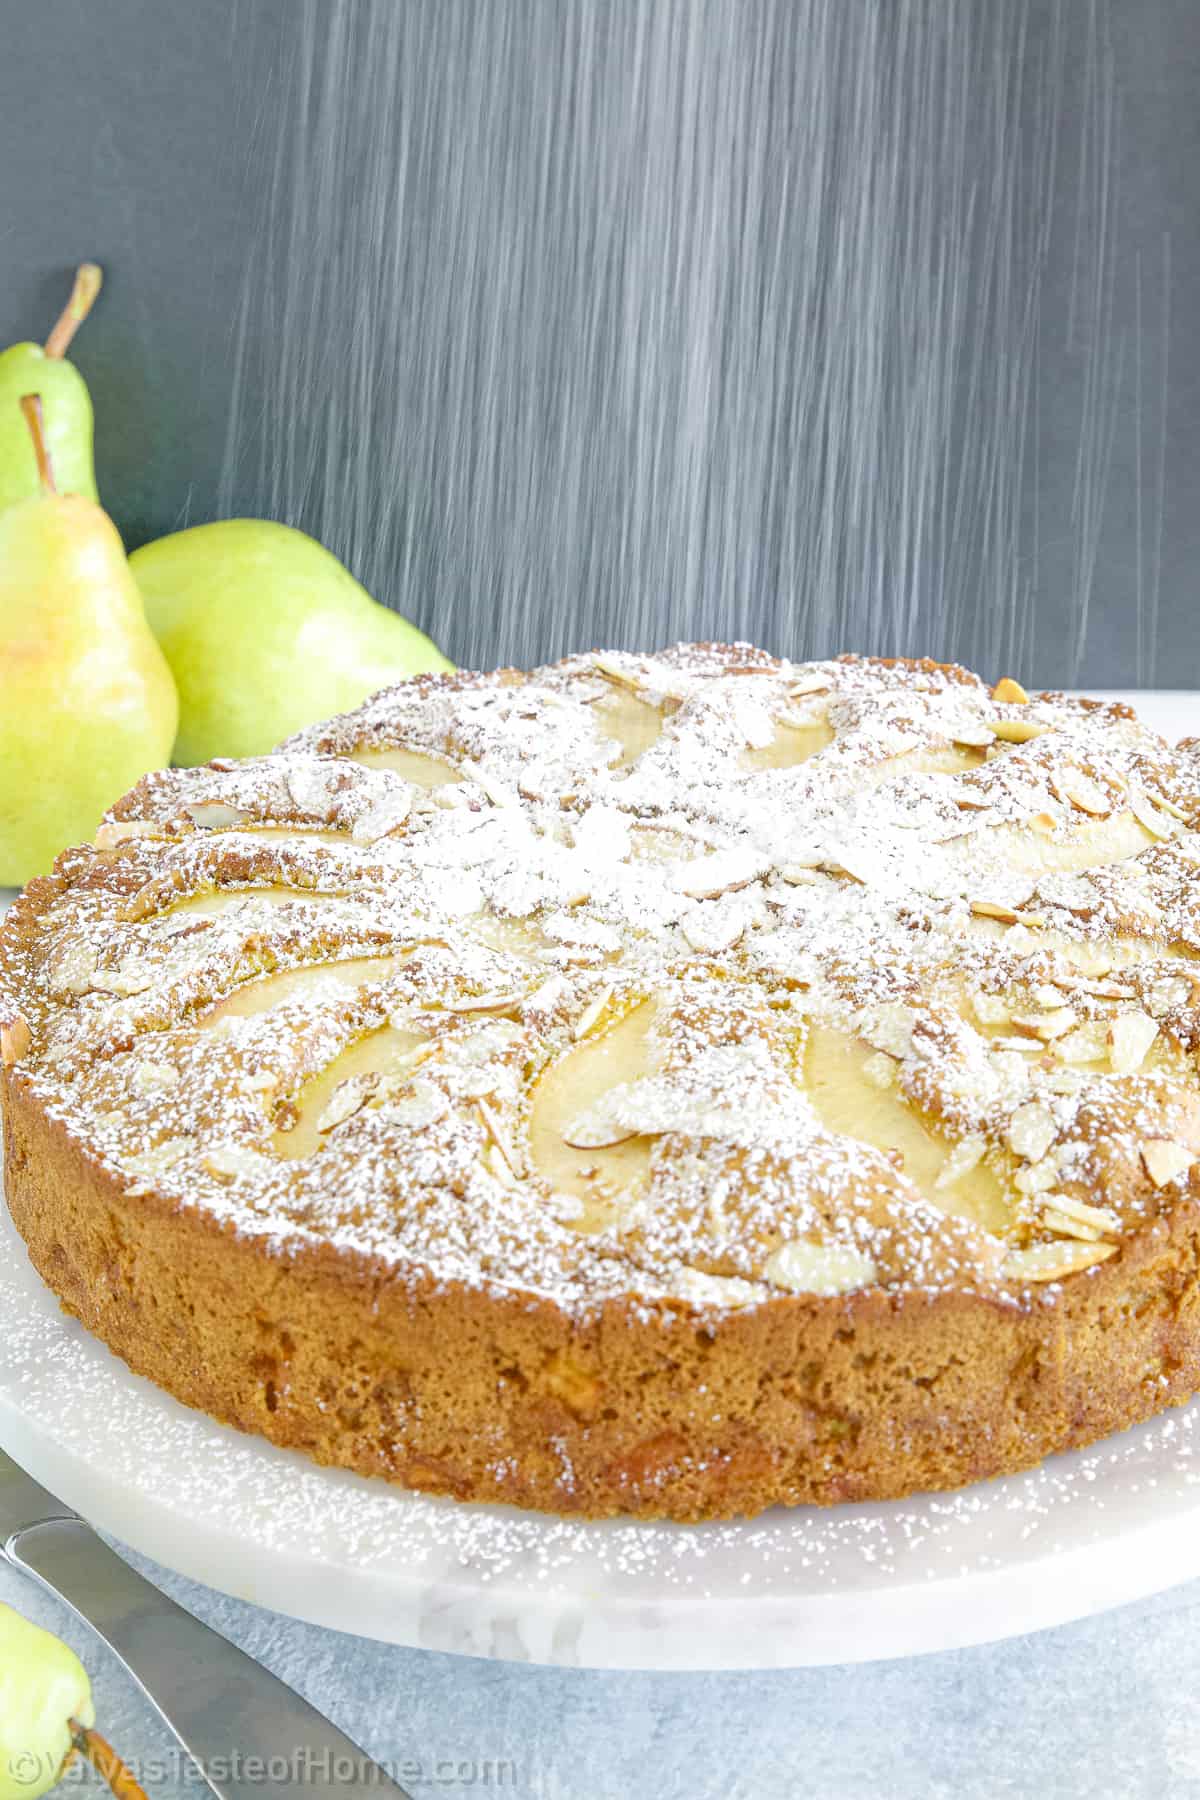 The addition of pears offers a pleasant fruity note, while the almond slivers on top add an extra layer of crunch. 